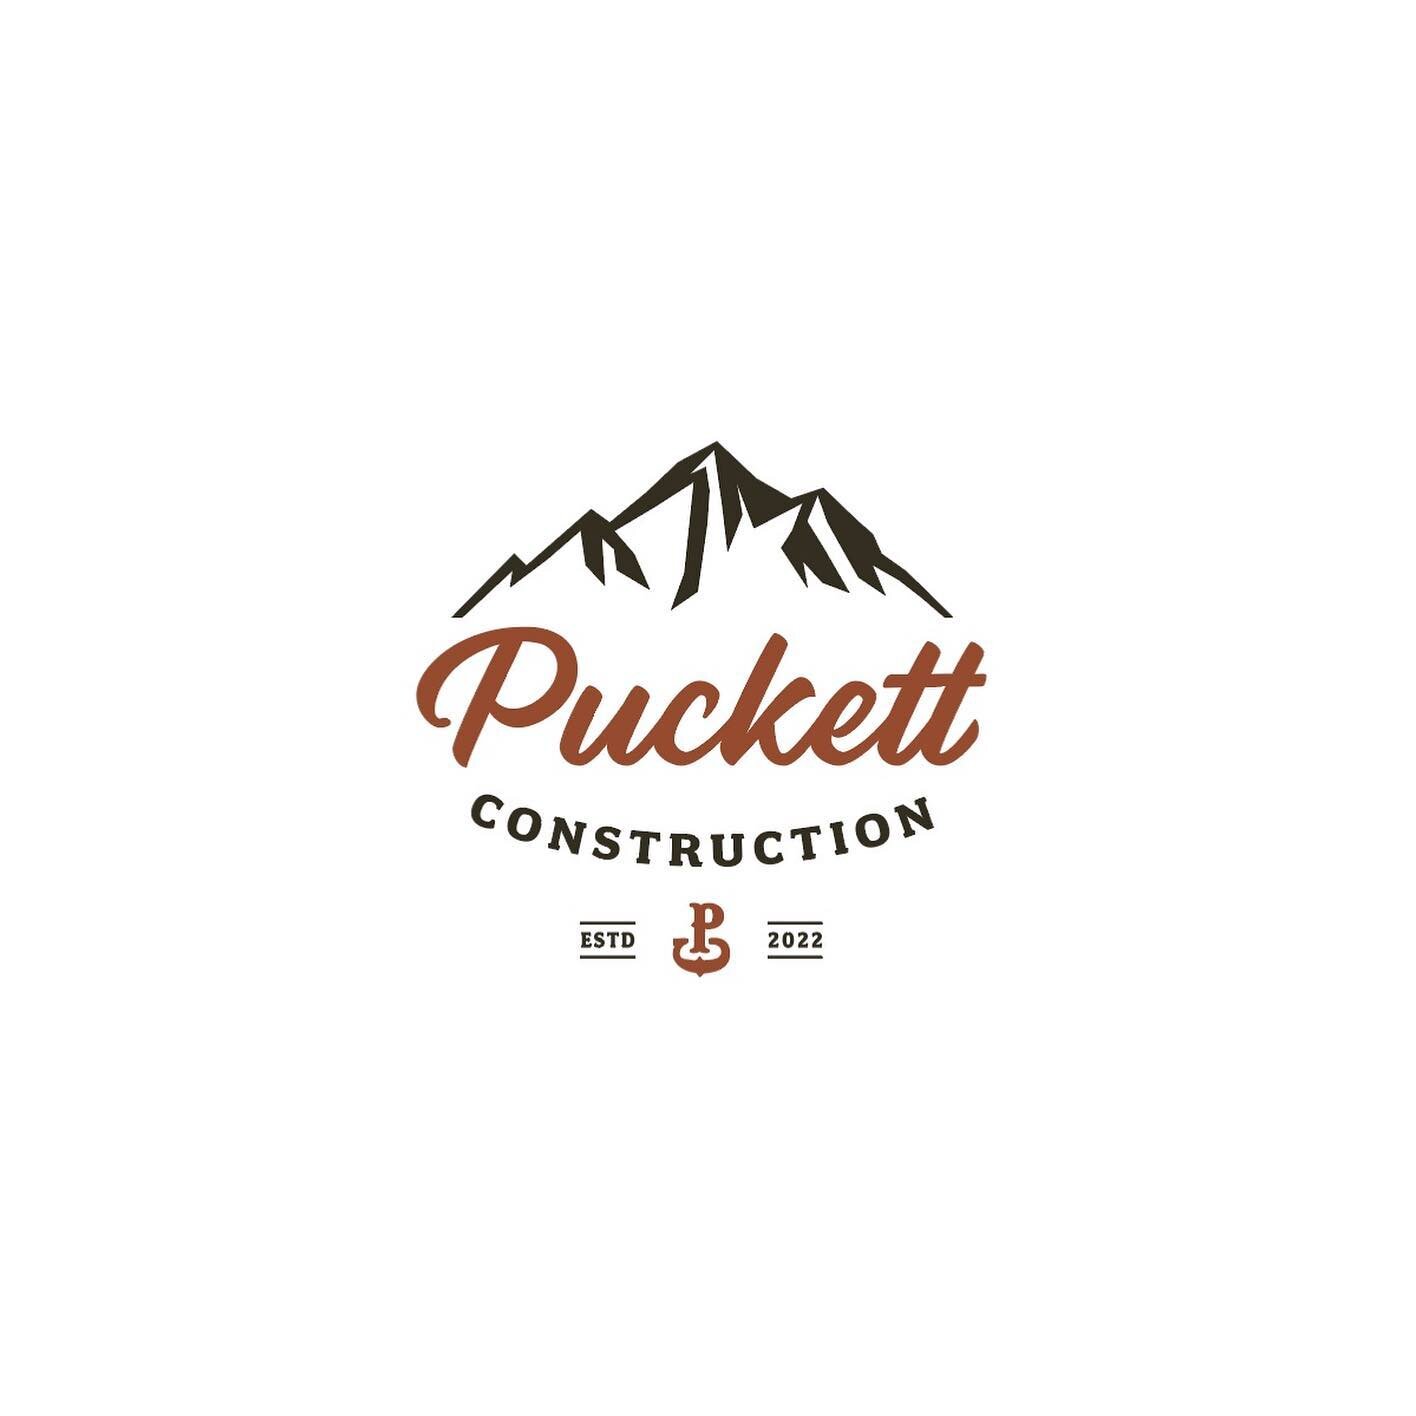 Just wrapped up a fun one! Big thanks to @puckettconstruction.oregon for giving me the opportunity to work together on this one! If you&rsquo;re local to Central Oregon, check them out for all your construction project needs! 🛠 
.
.
.
#studioraye #d